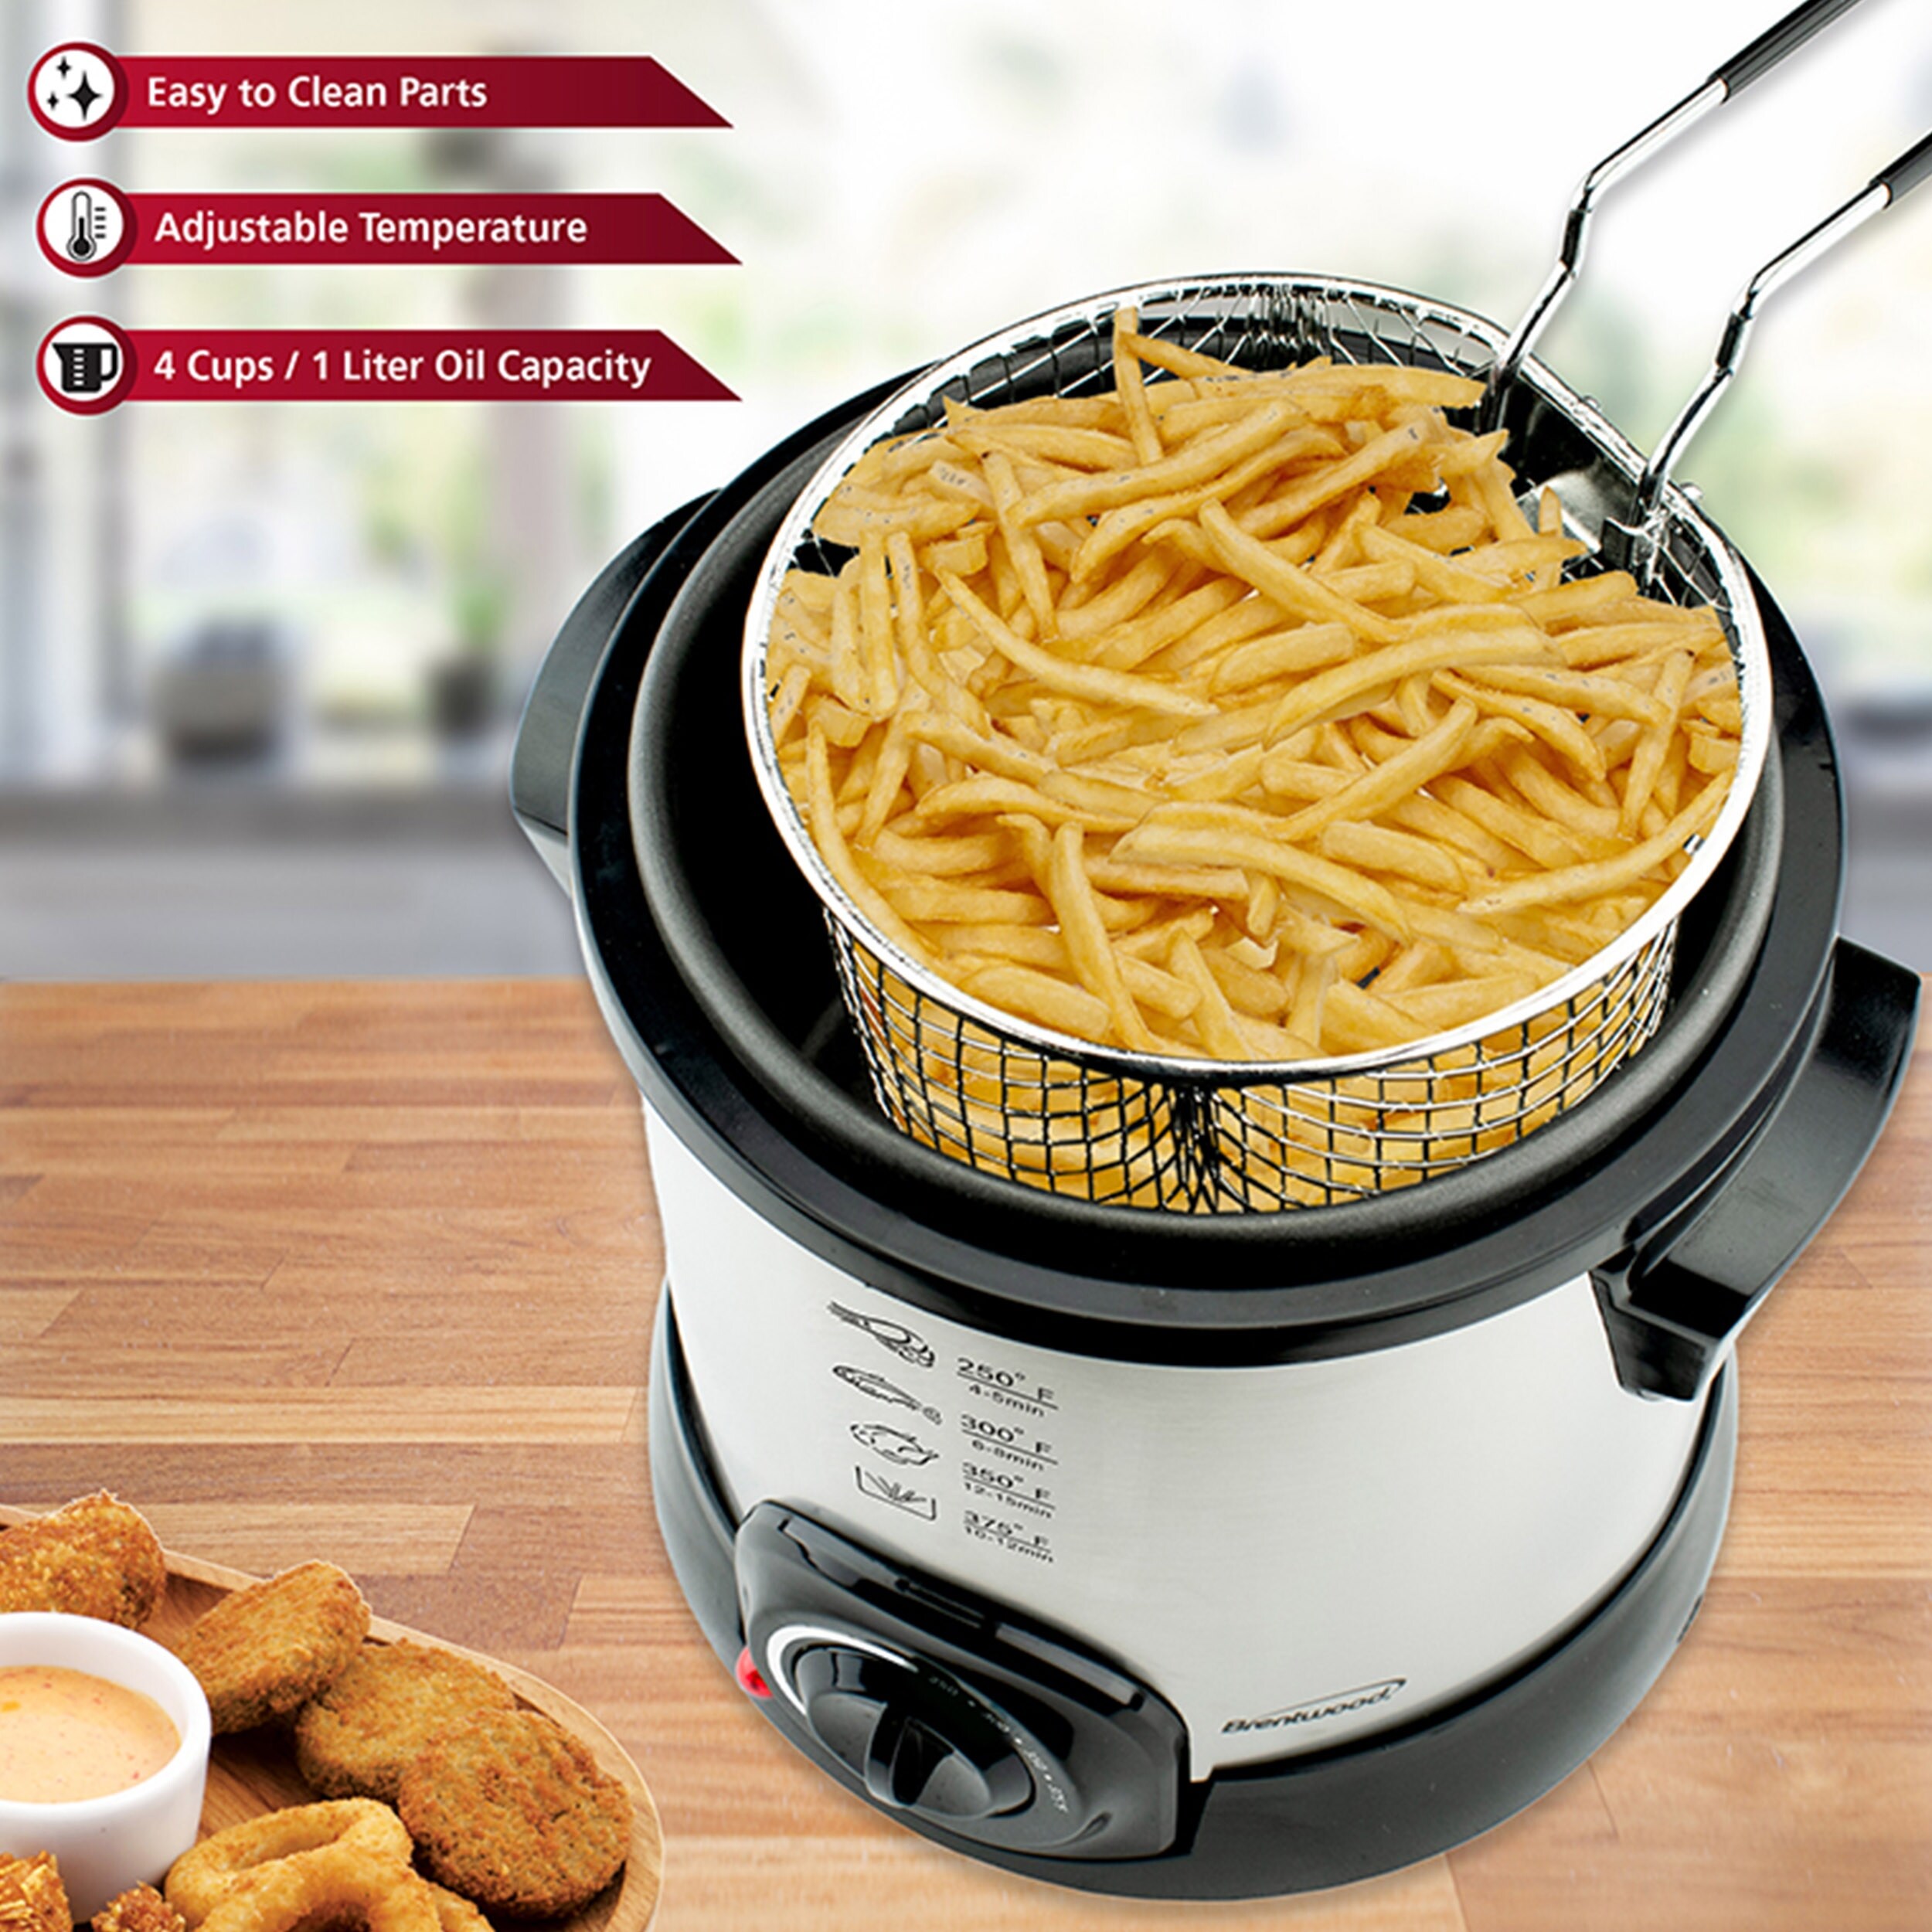 Cuisinart Compact Deep Fryer CDF-100P1 Brushed Stainless